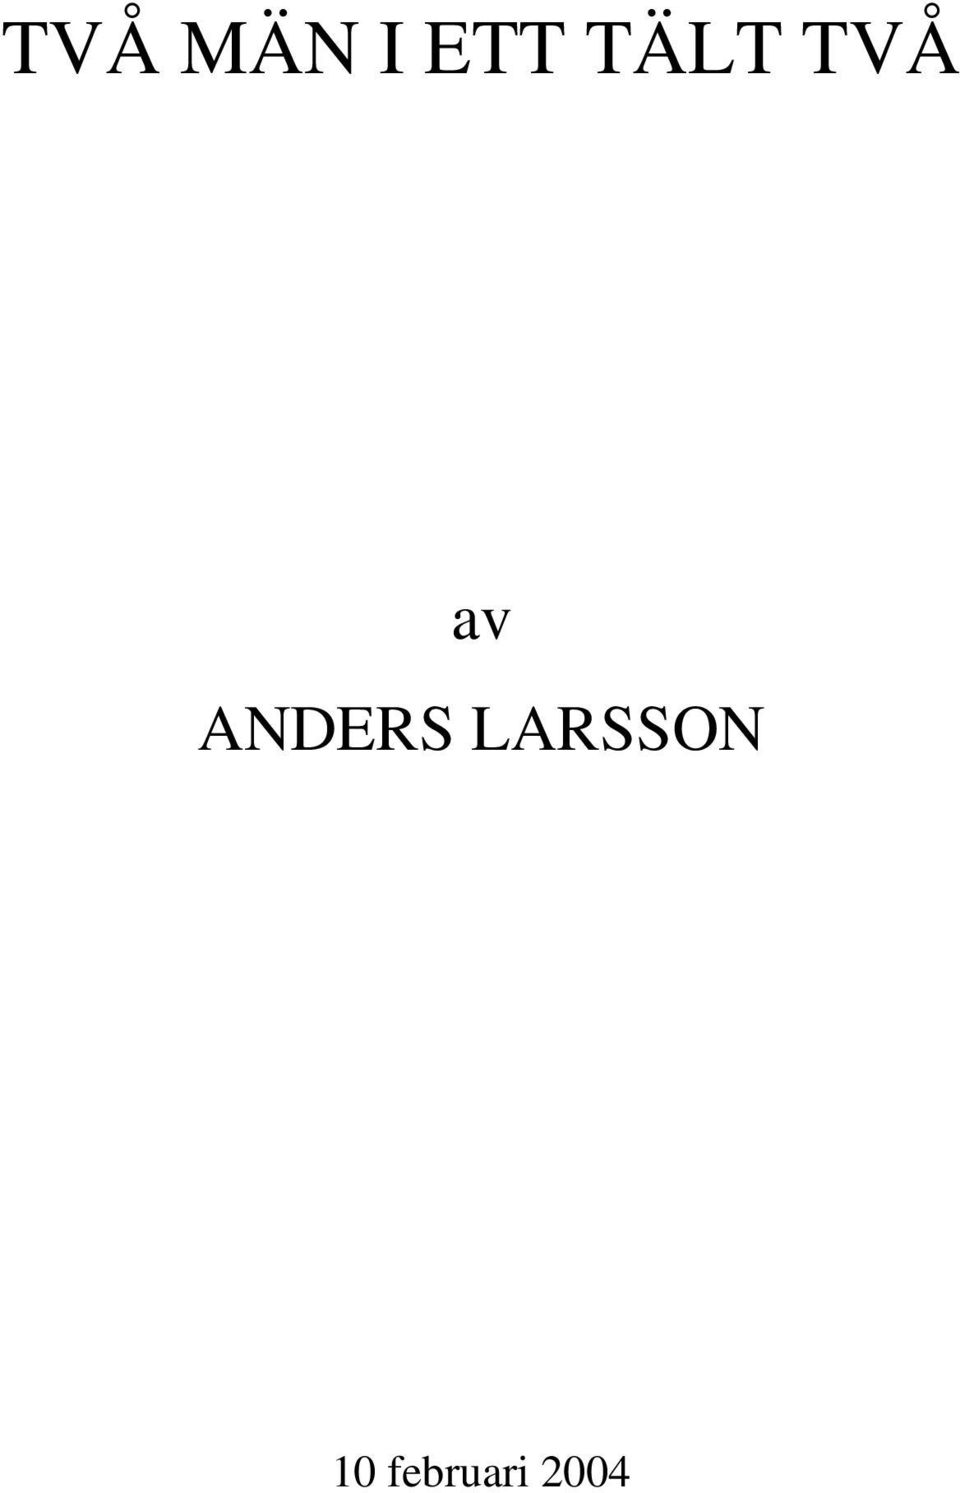 ANDERS LARSSON